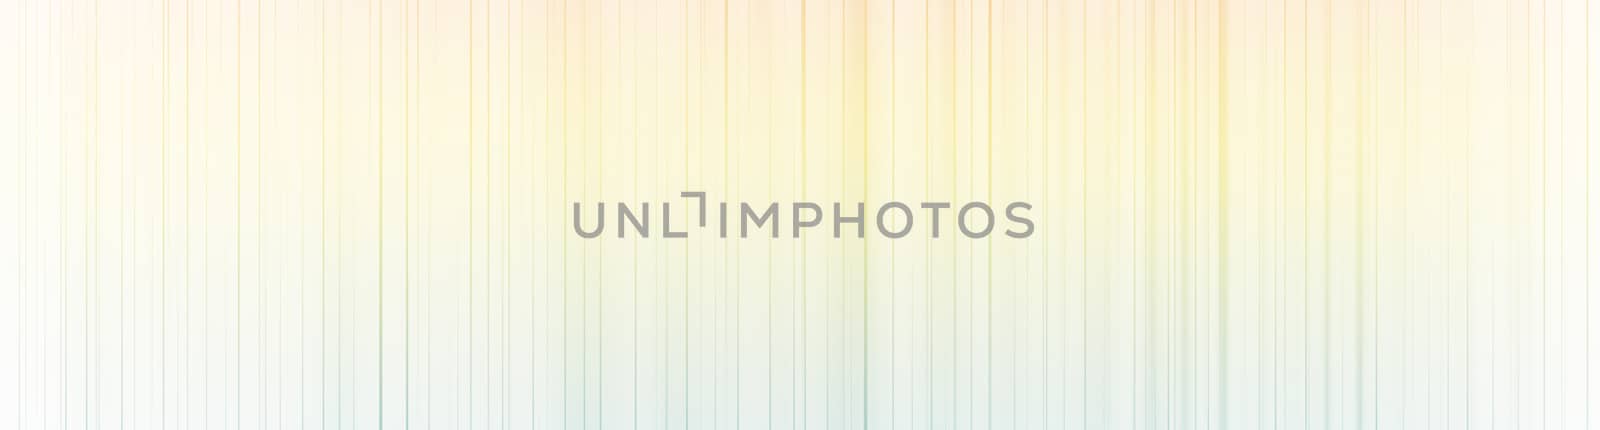 Yellow abstract background for web design. Colorful gradient.